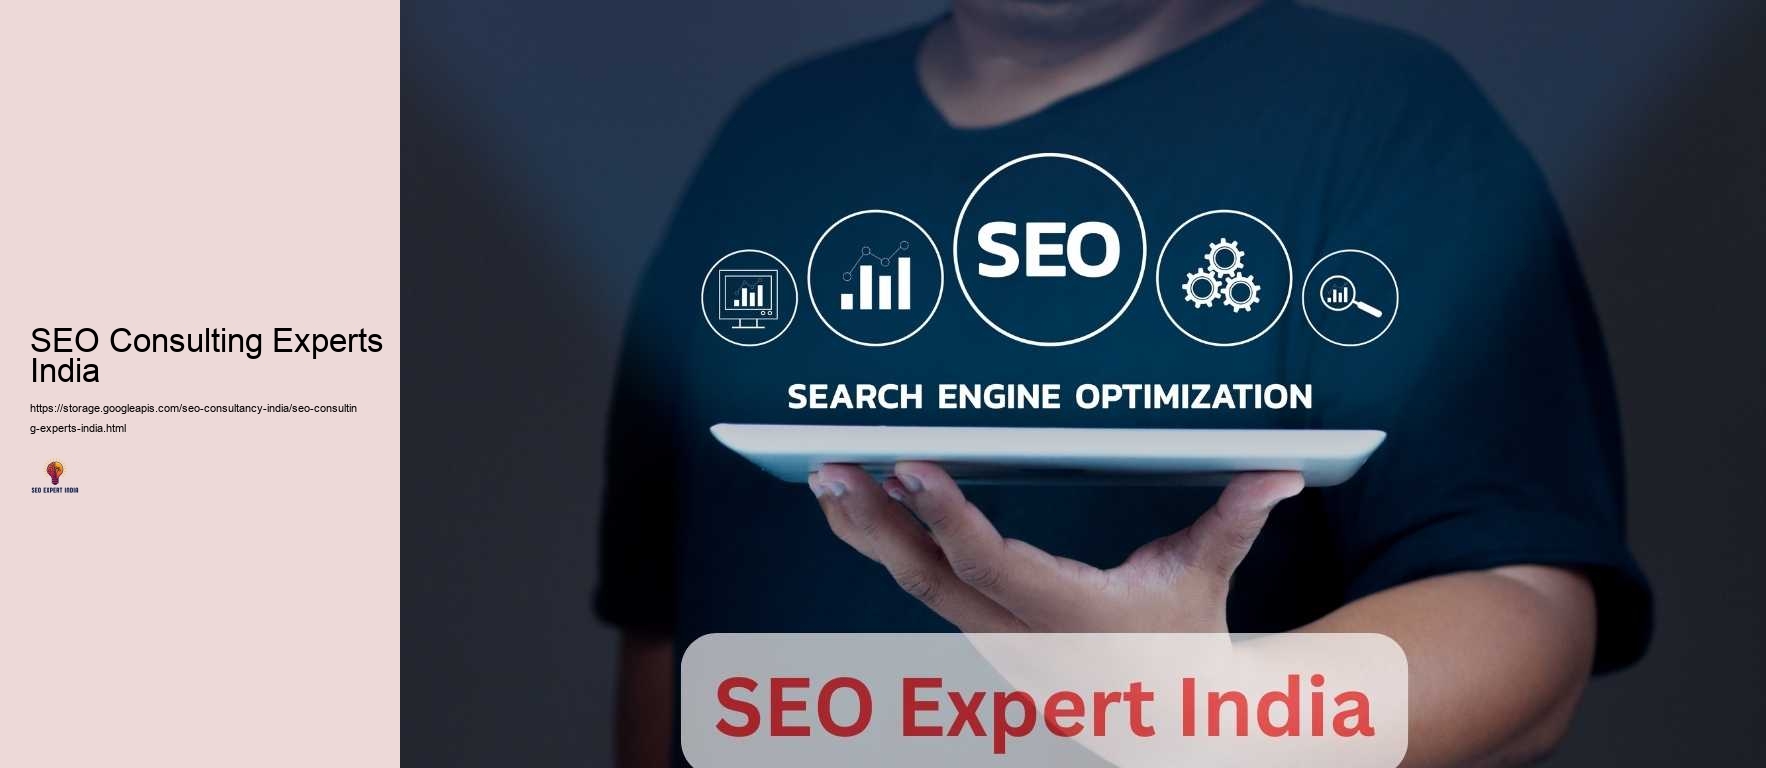 SEO Consulting Experts India